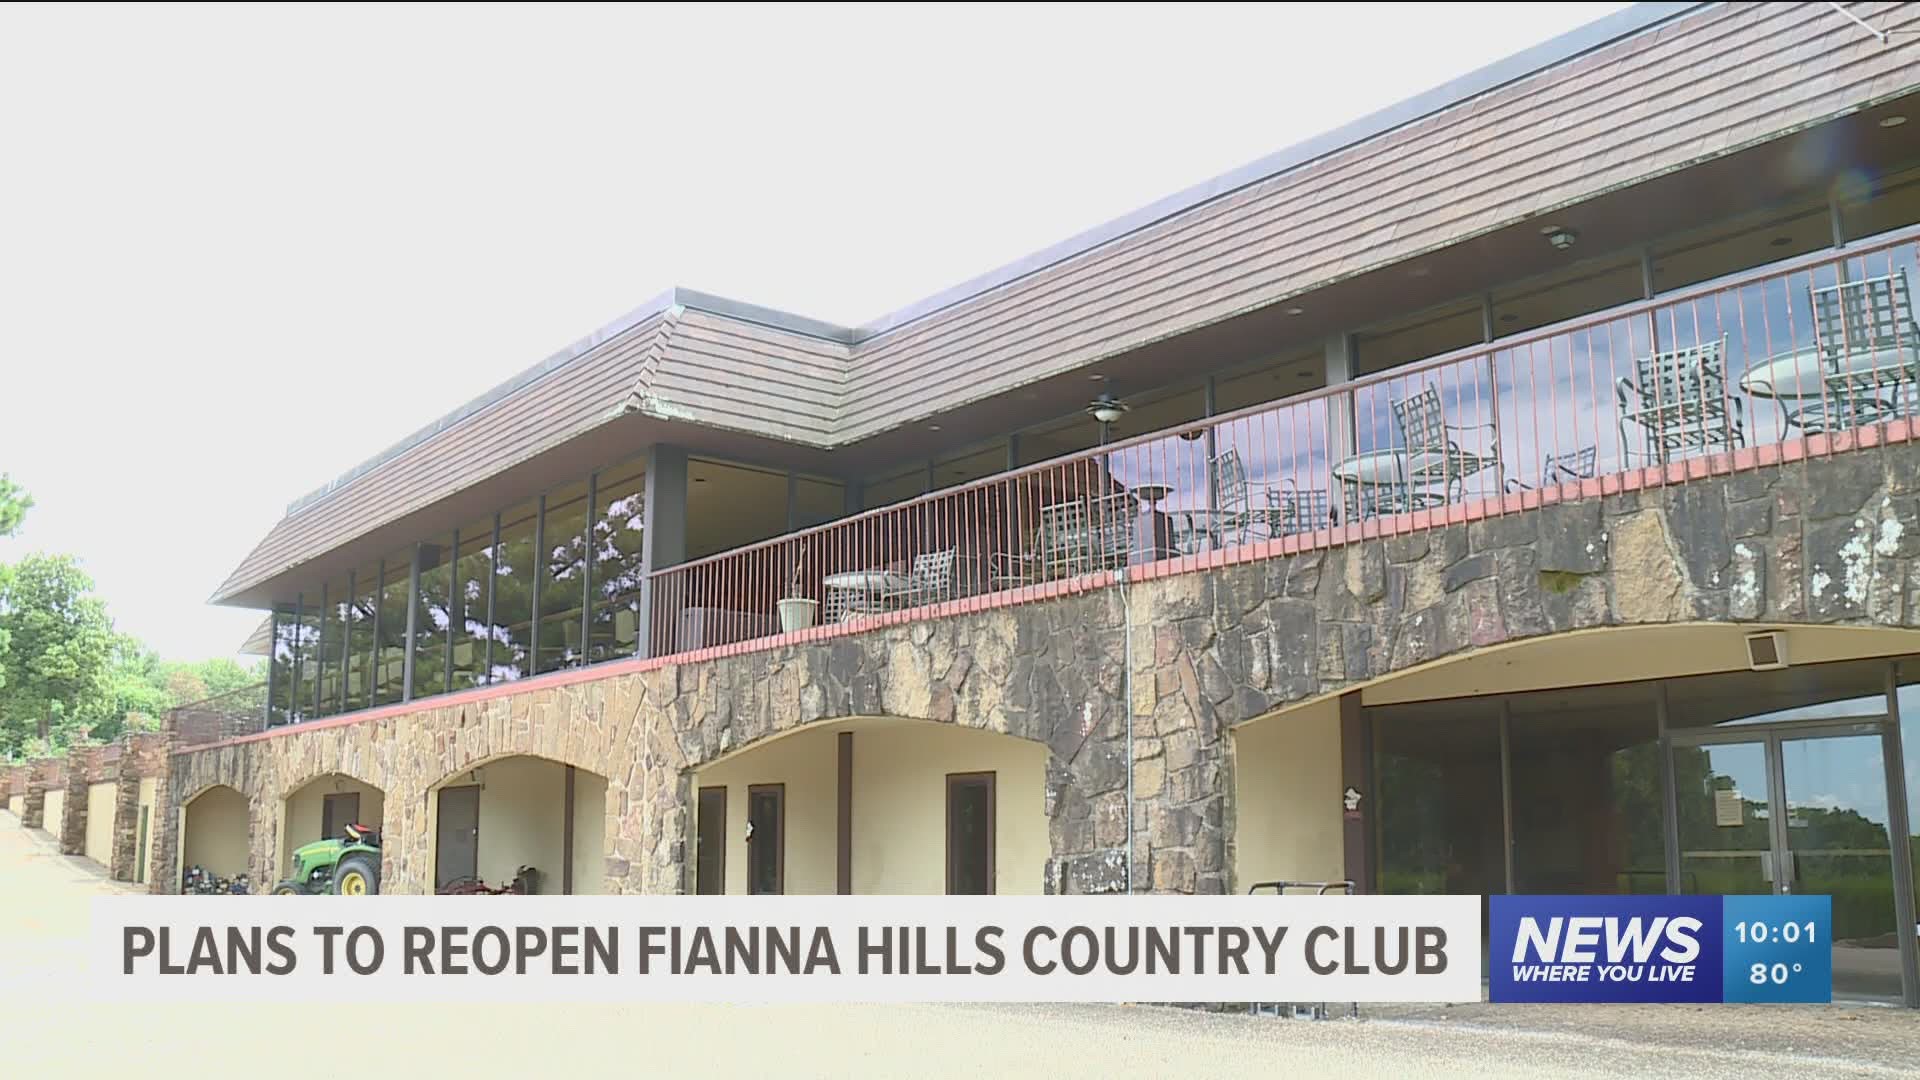 The country club has had its amenities shut down for nearly two years and locals say it's time for a change. https://bit.ly/39pVWCz